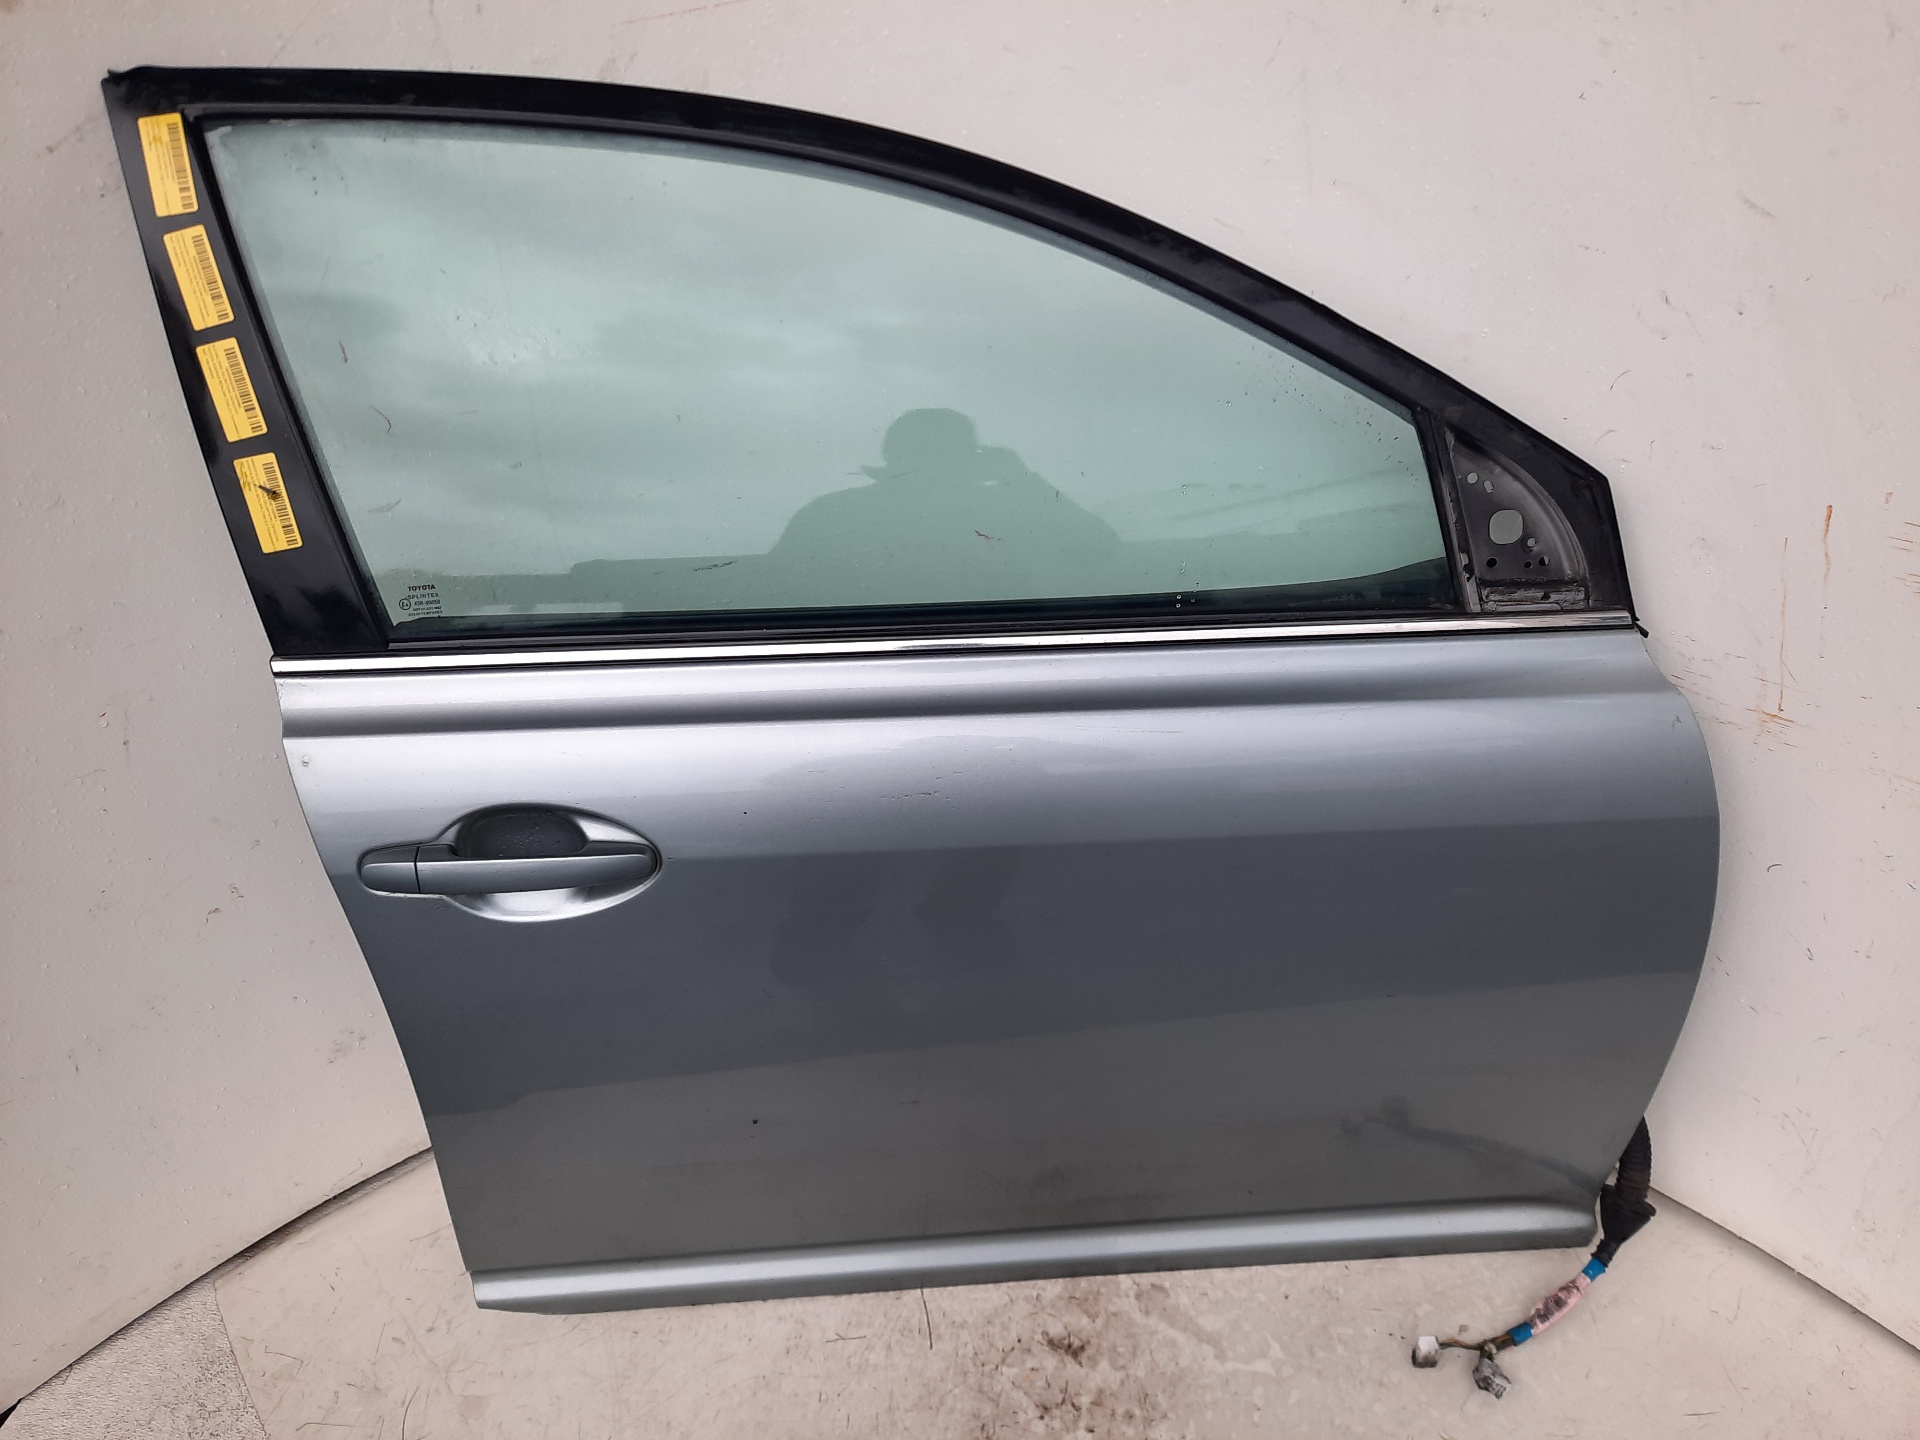 TOYOTA Avensis 2 generation (2002-2009) Front Right Door 6700105050 18623195